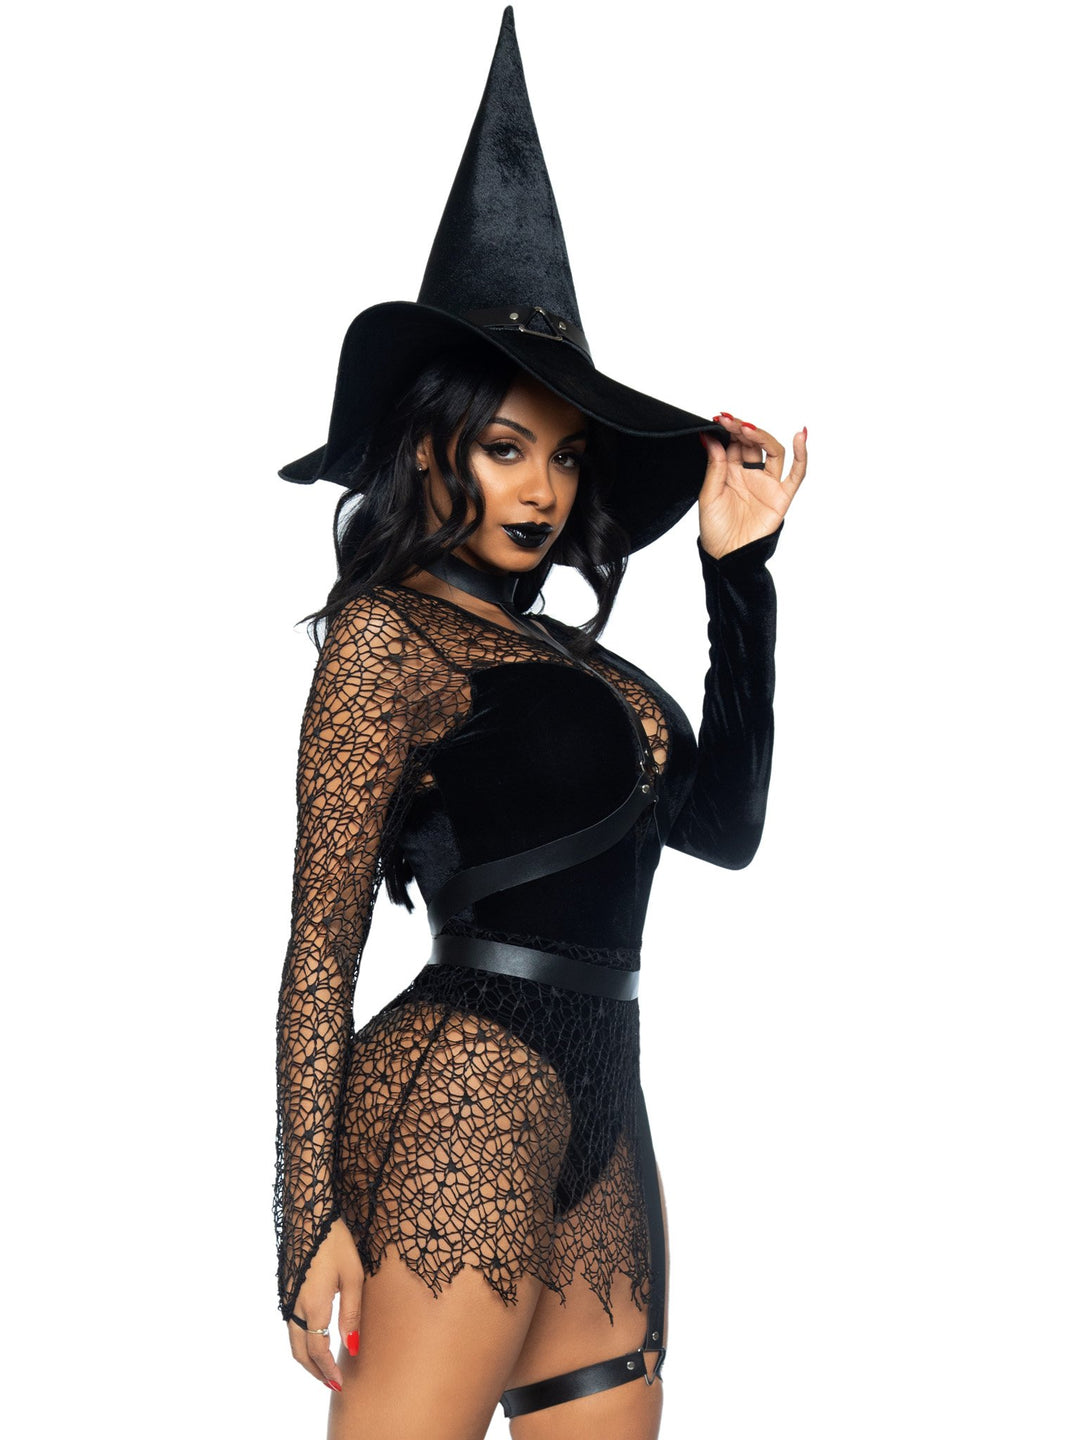 Velvet Witch Plunging Bodysuit with Web Netting and Choker Body Harness